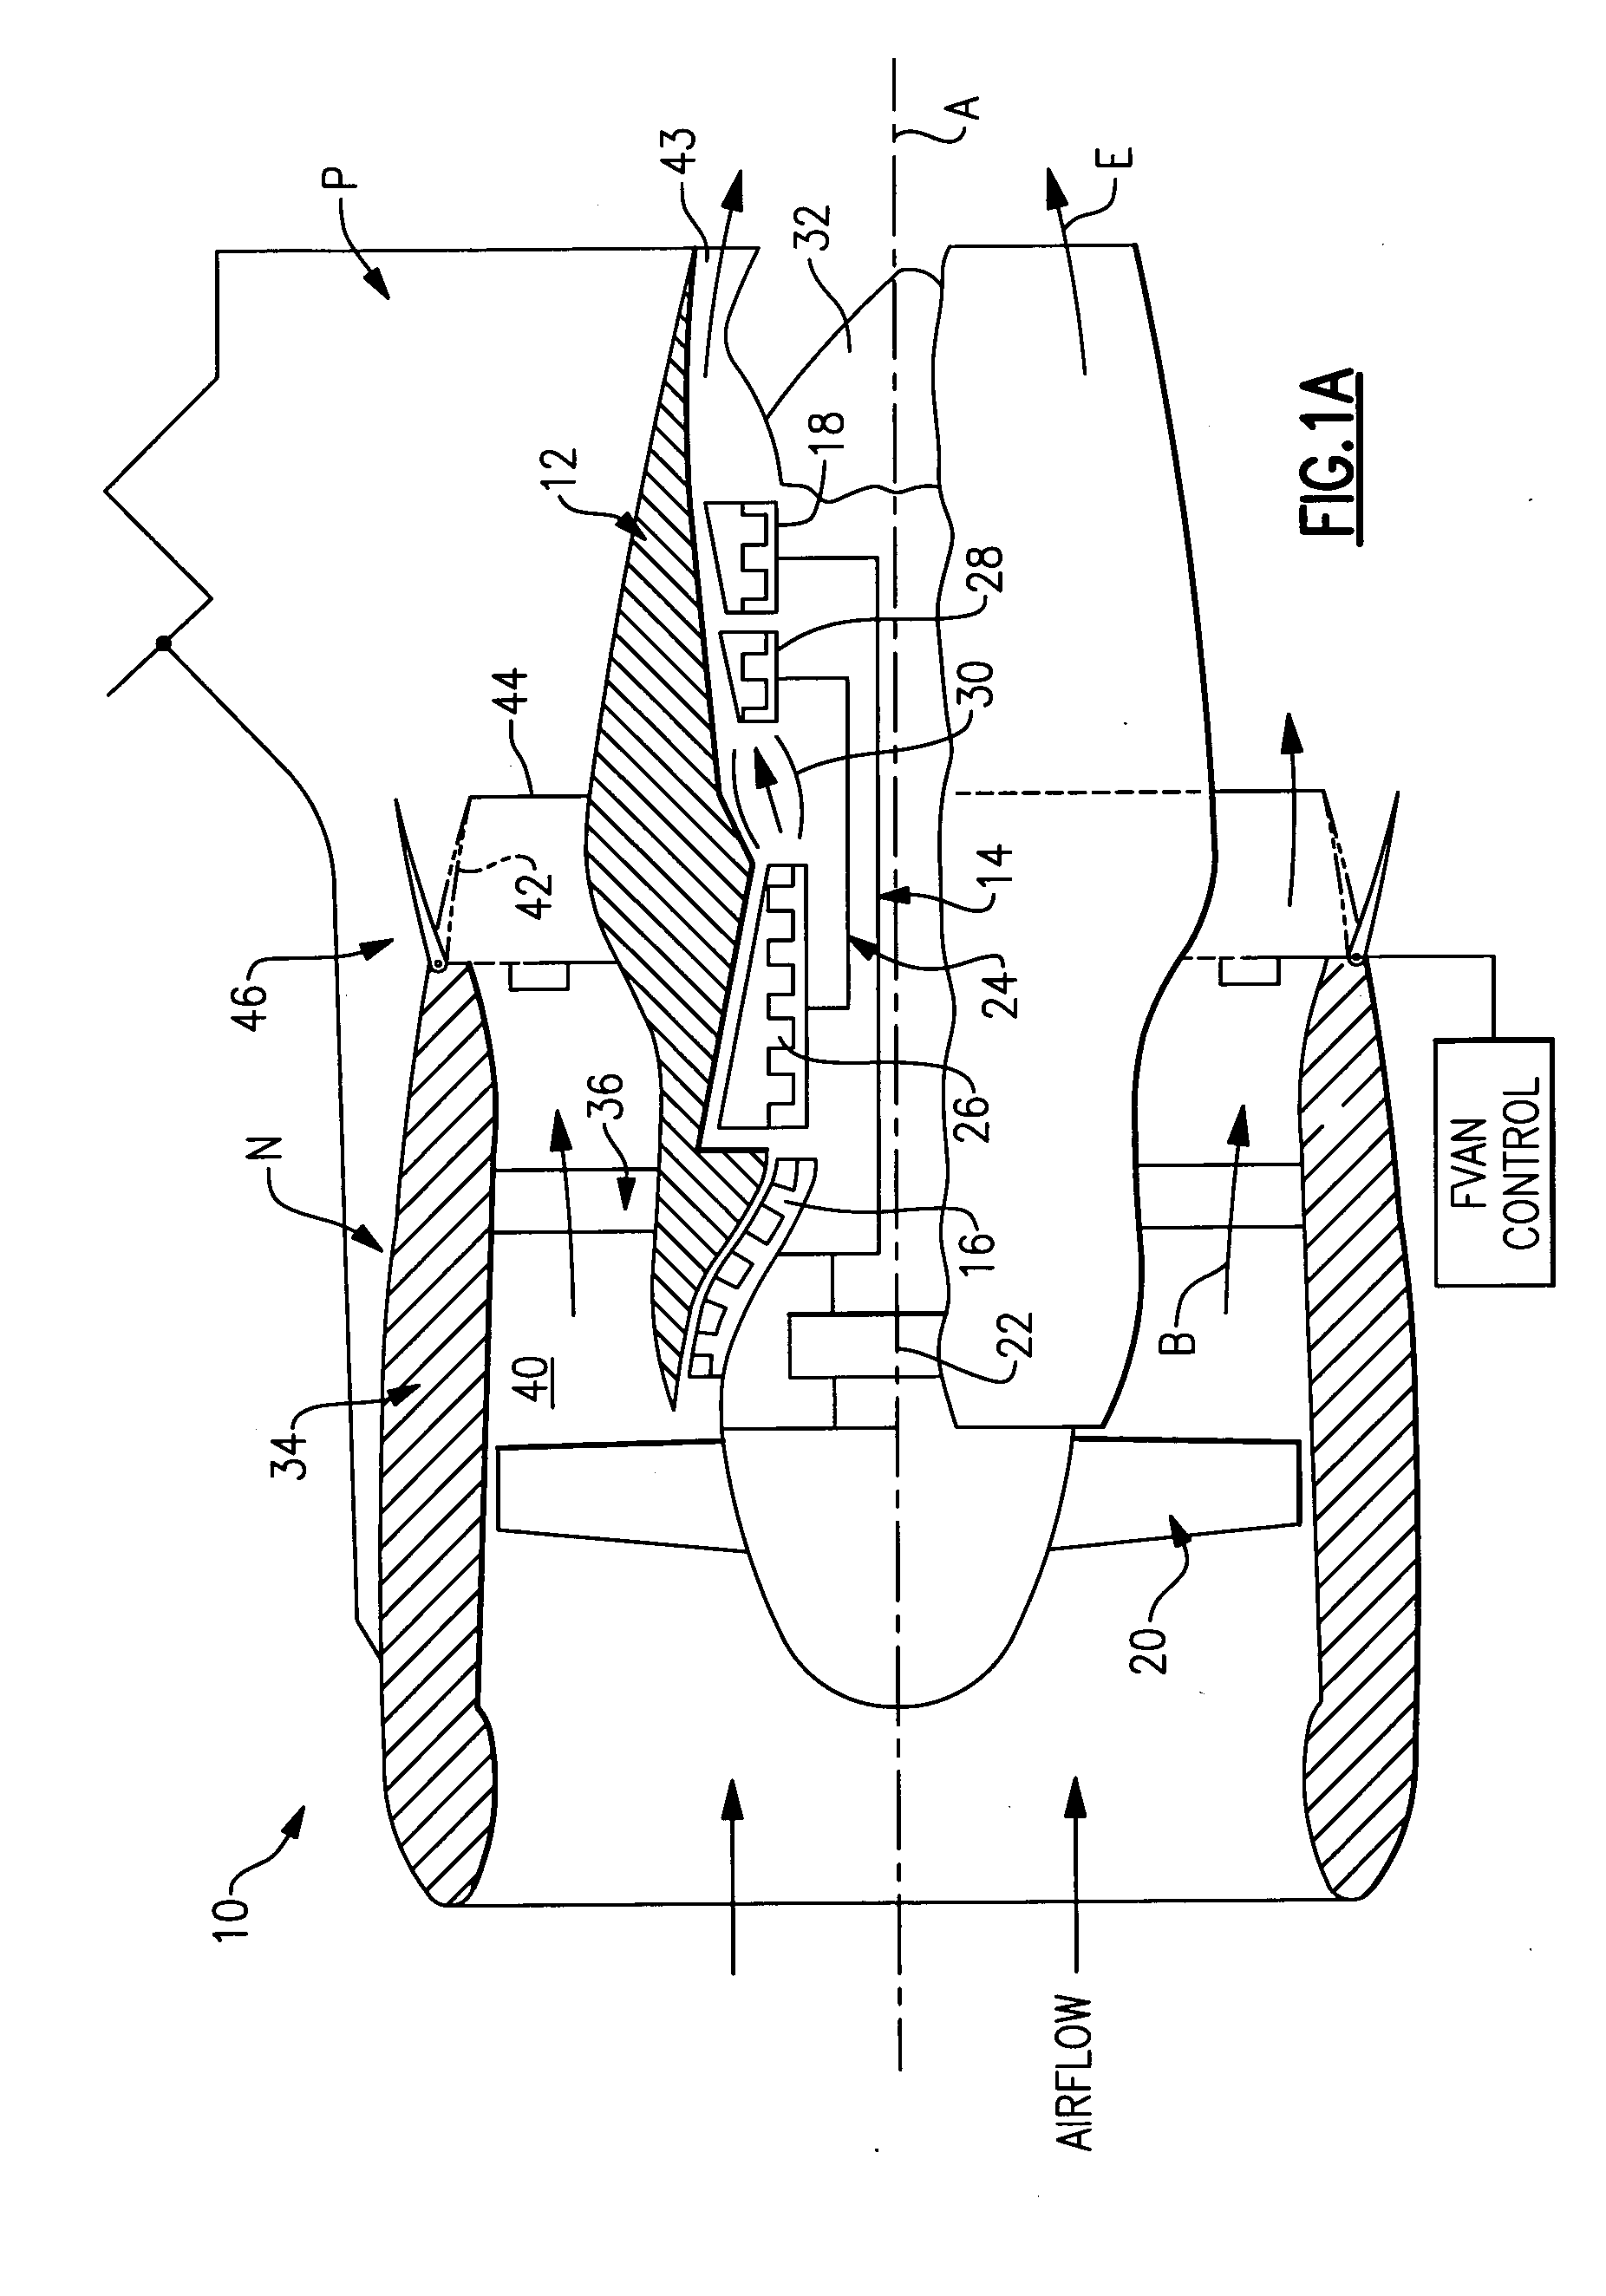 Fan variable area nozzle for a gas turbine engine fan nacelle with sliding actuation system